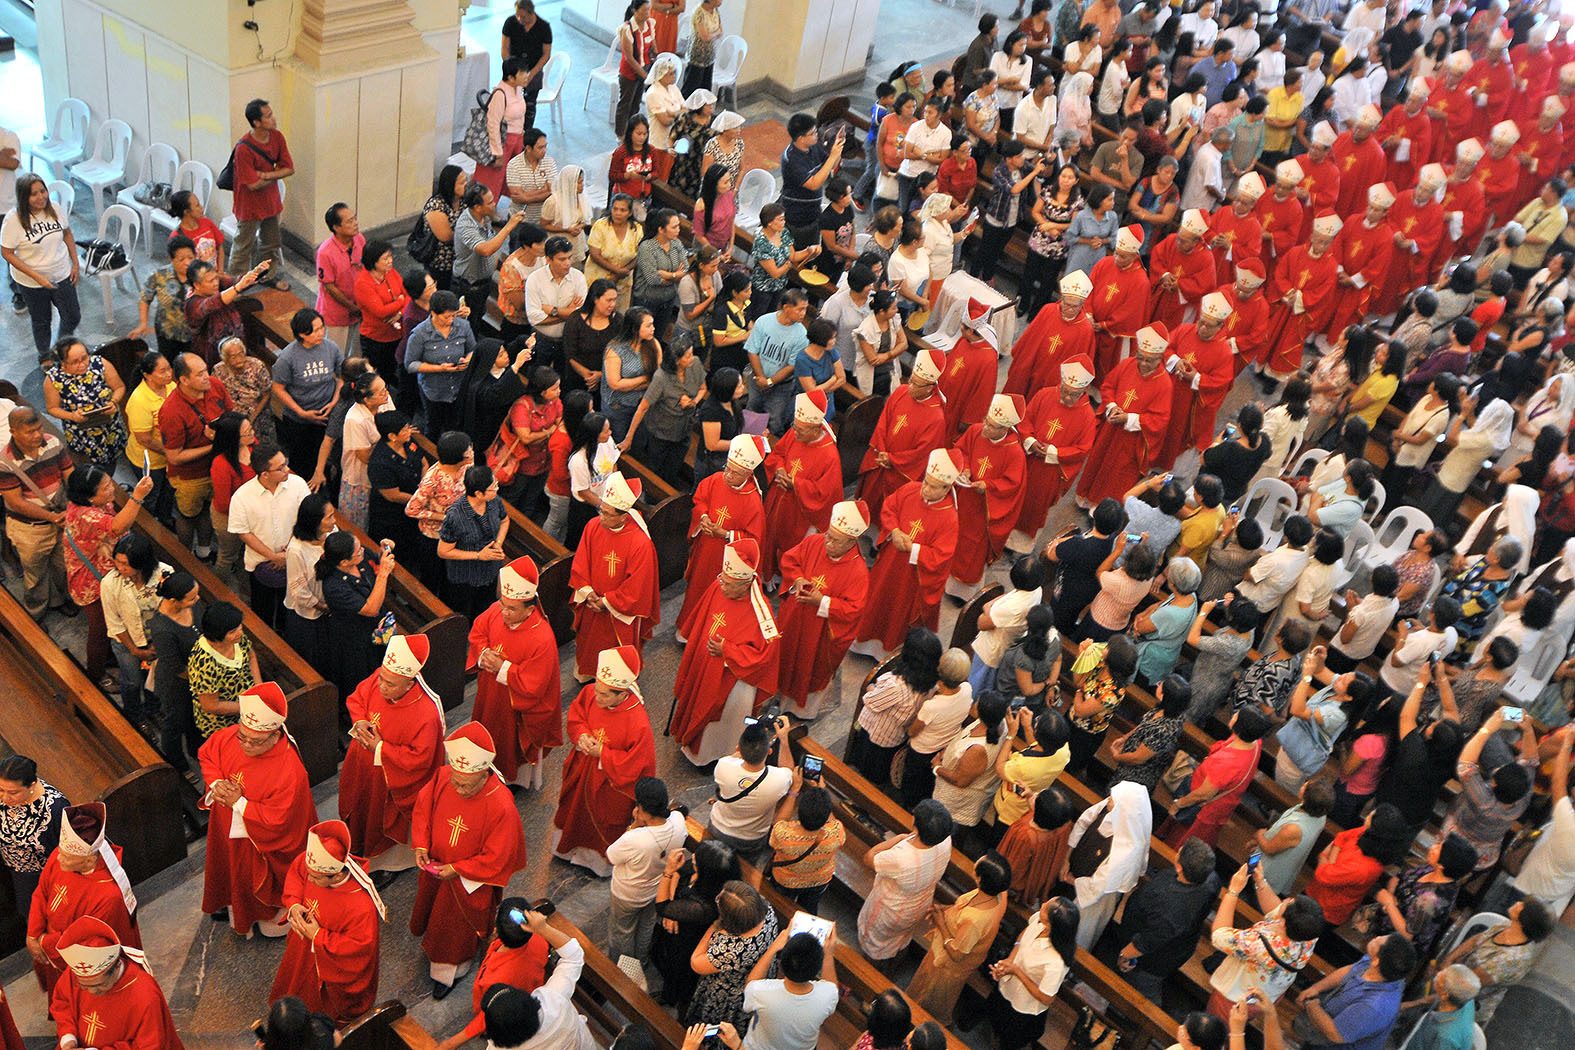 CBCP hits draconian security laws in Philippines, Hong Kong